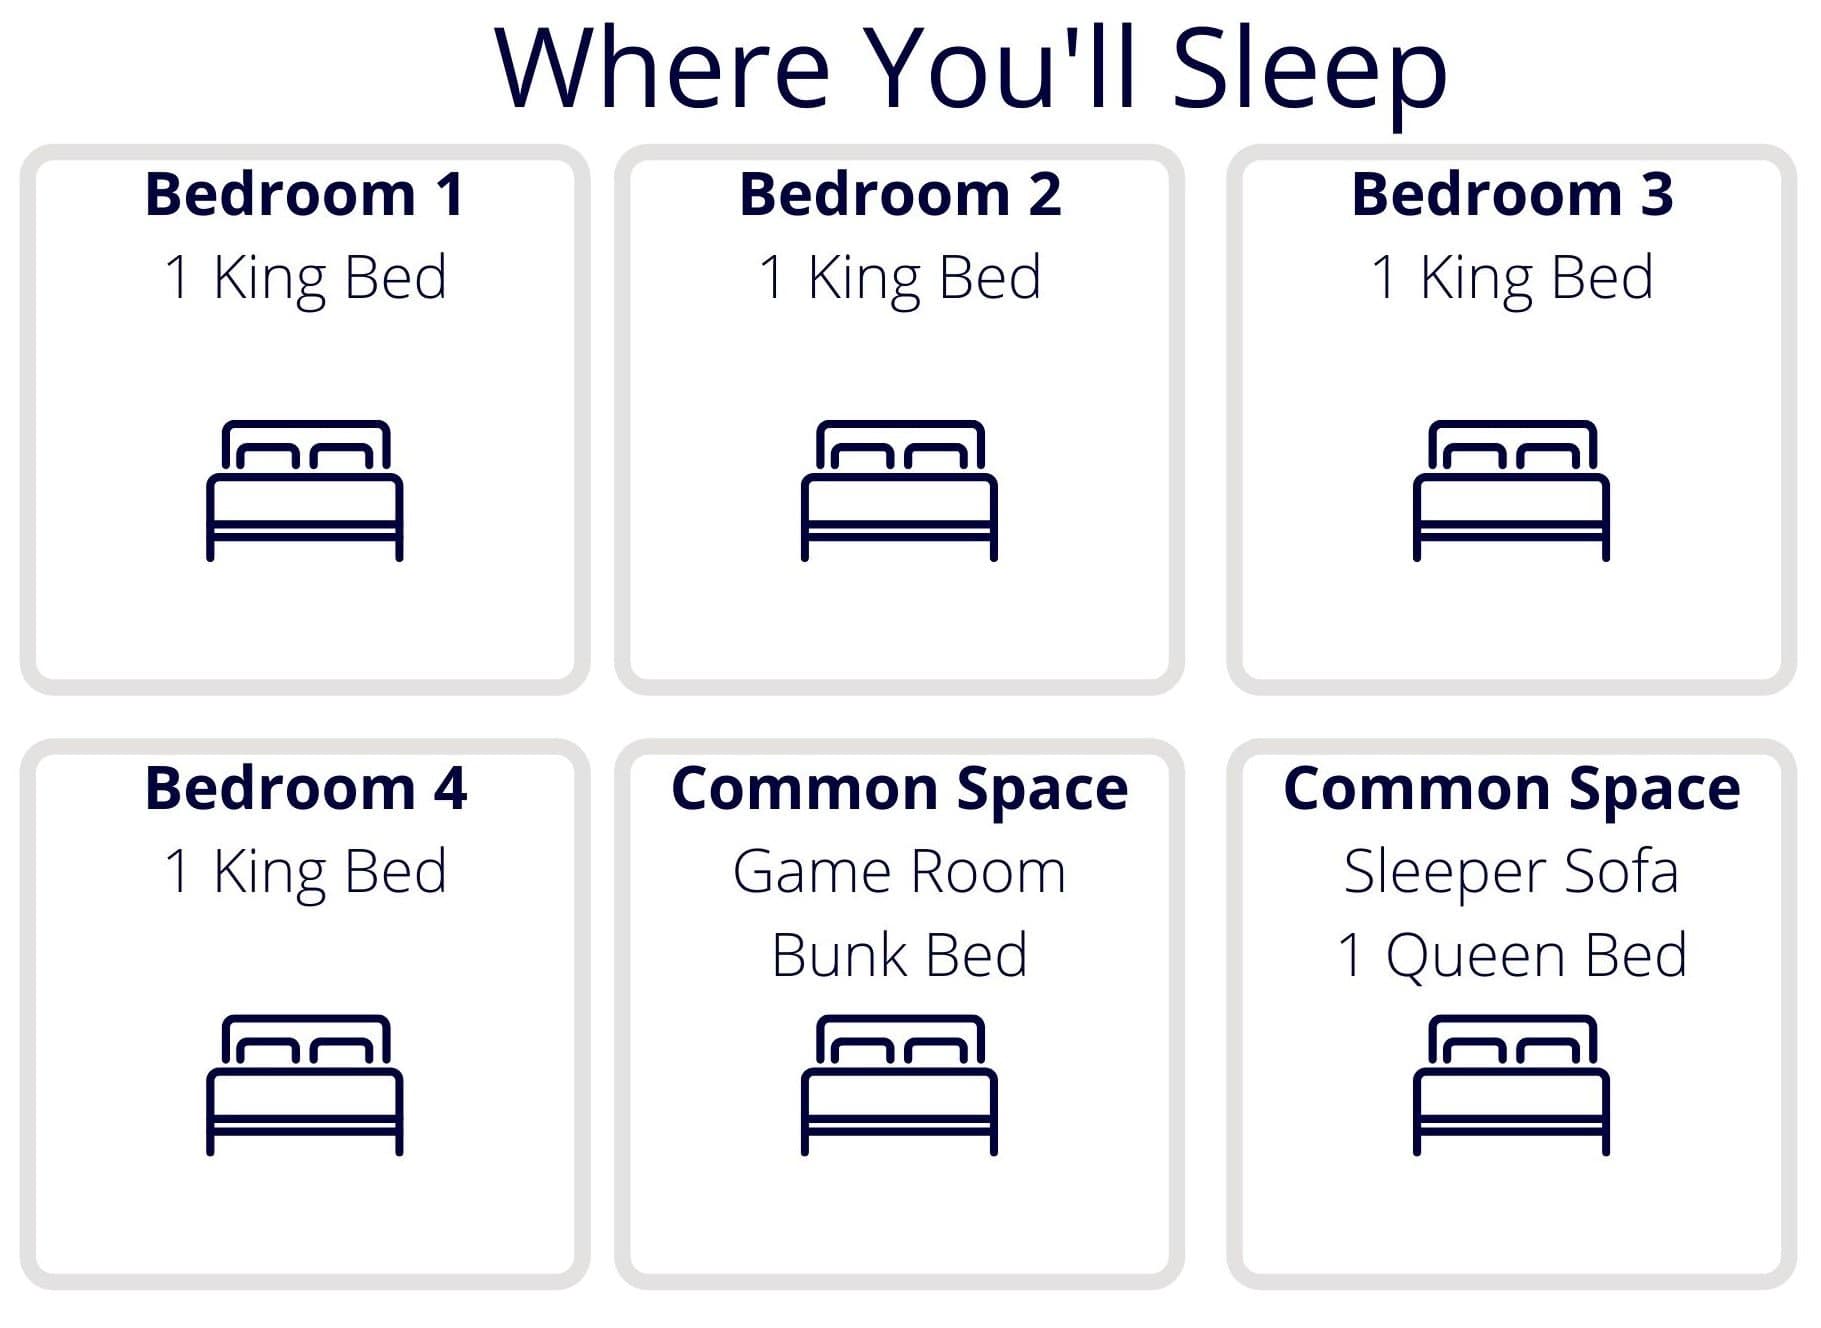 Sleeping arrangements infographic - 4 bedrooms with king beds, a bunk bed and queen sleeper sofa in the game room